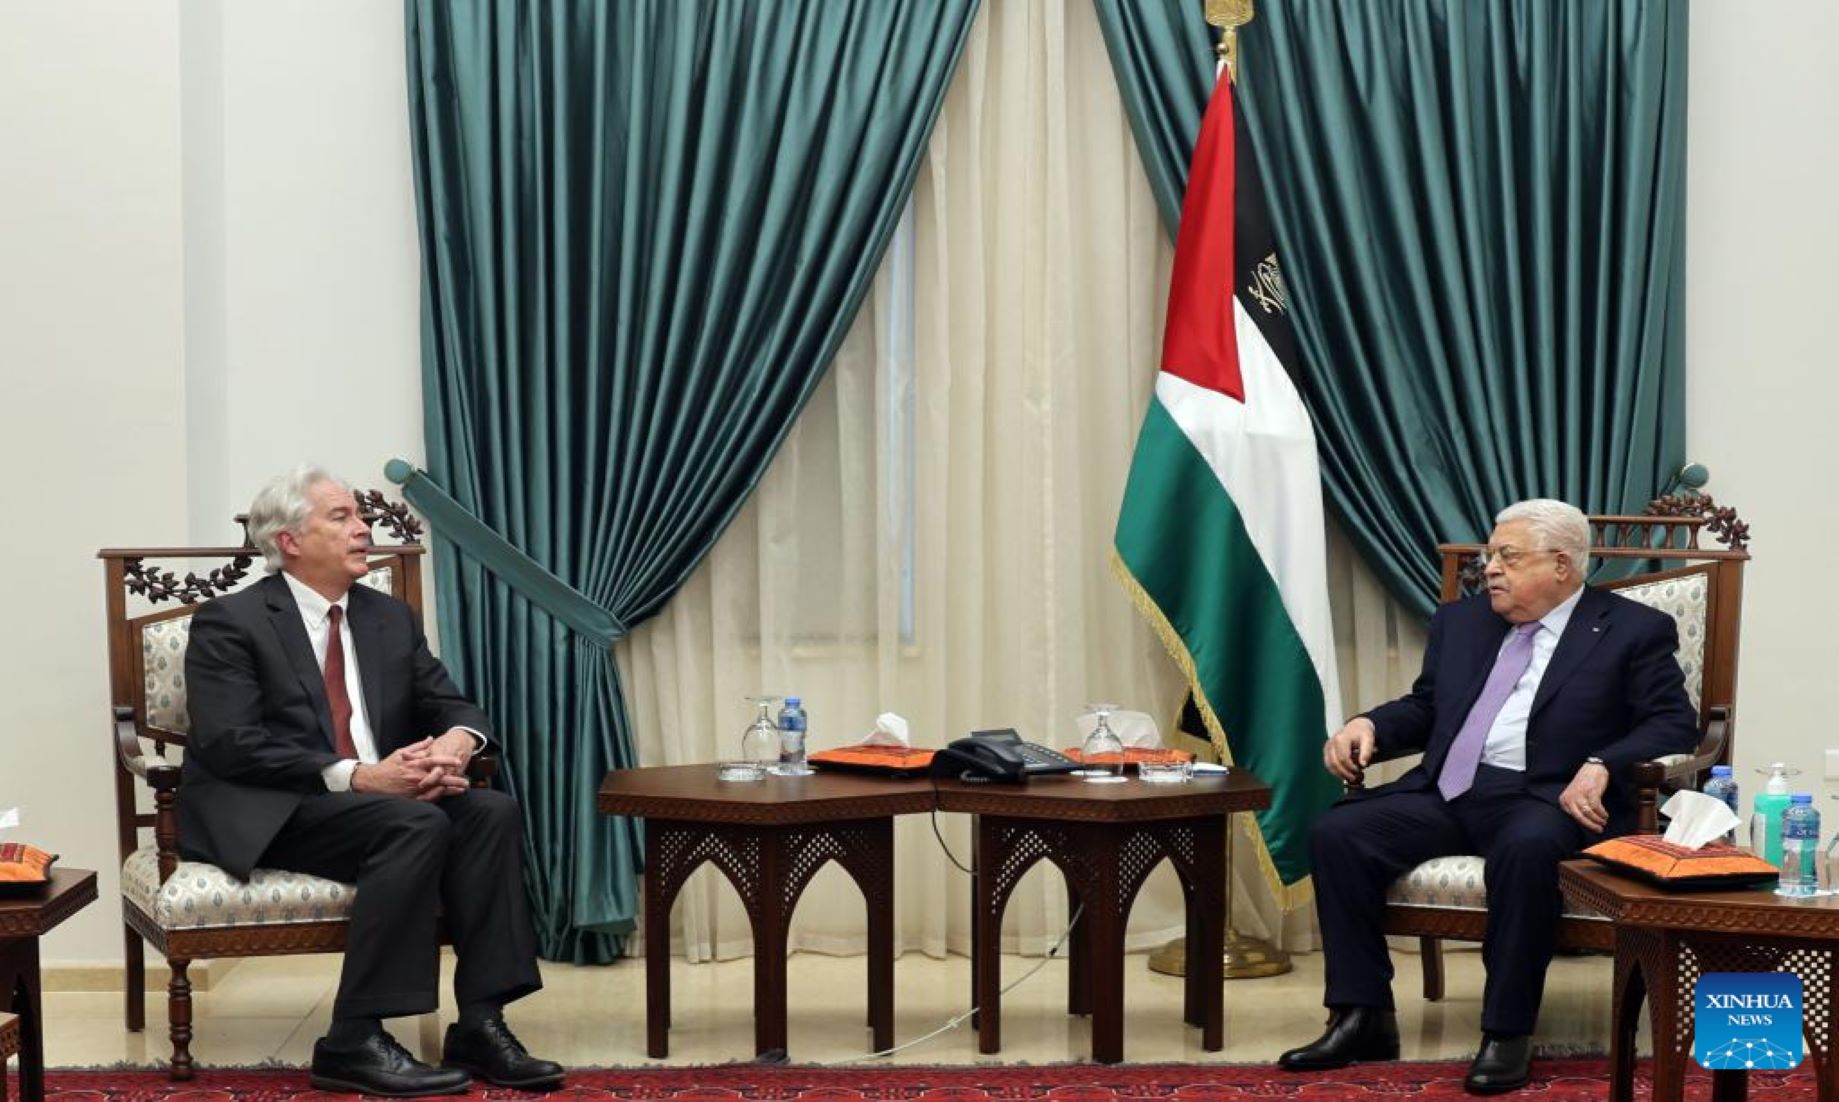 Palestinian President Urged CIA Chief To Pressure Israel To Stop Unilateral Measures